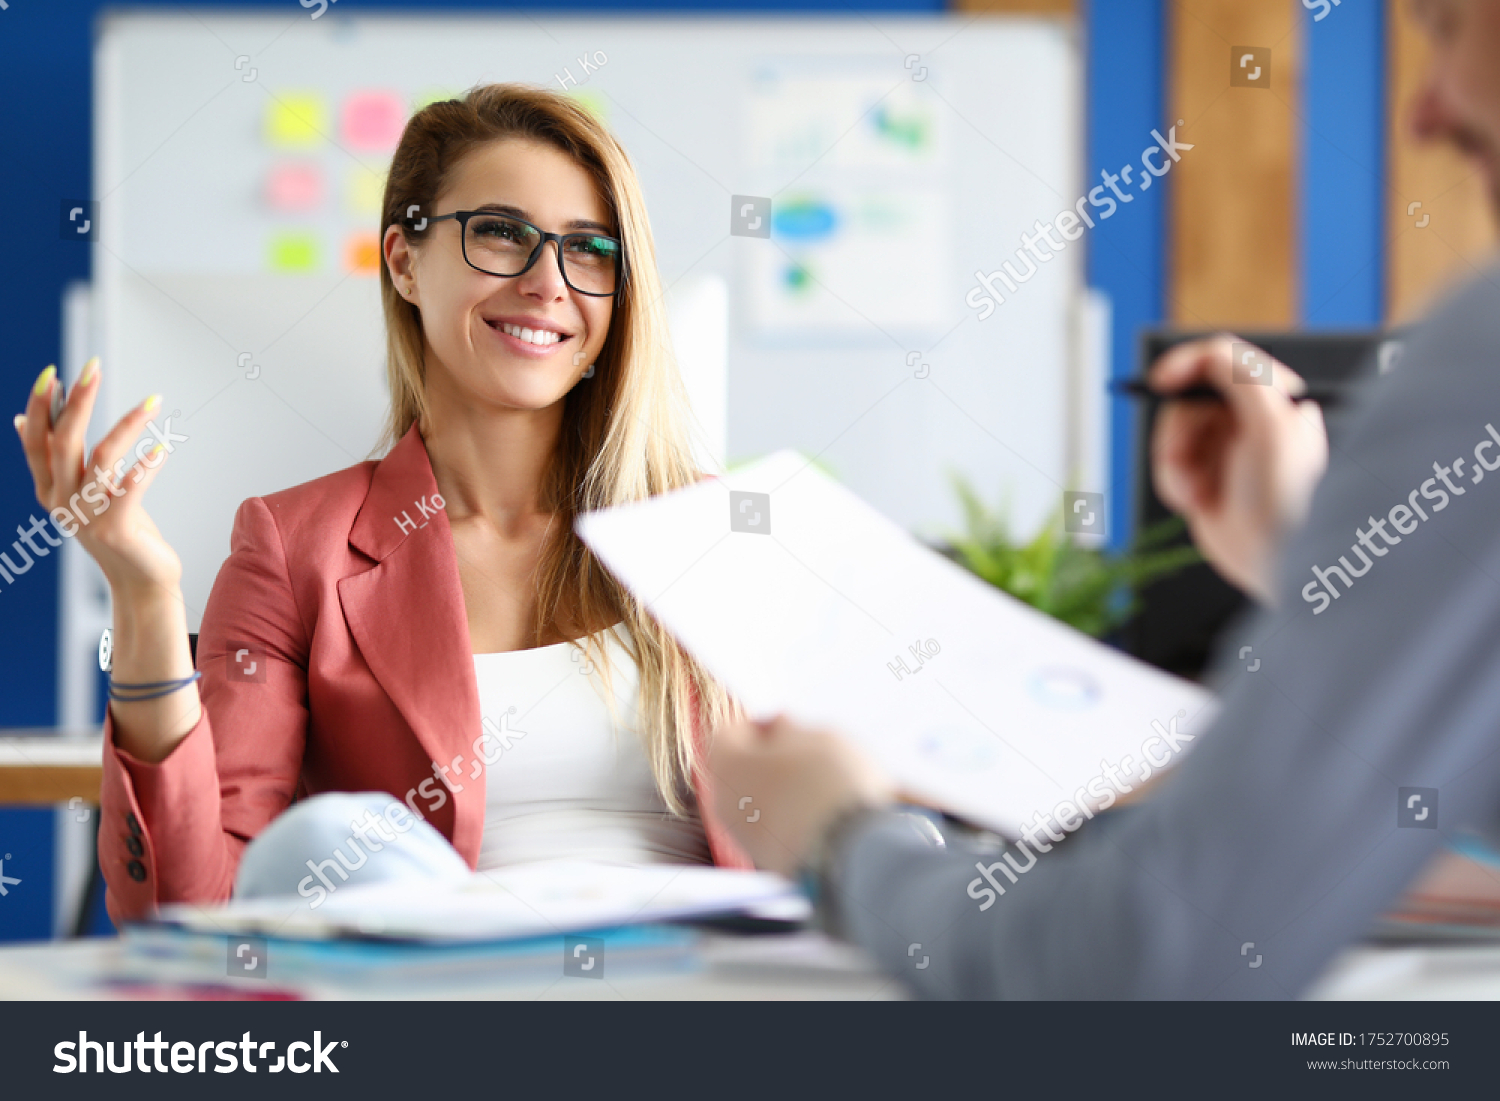 Two adult business people make work interview against office background.One on one meeting concept. #1752700895